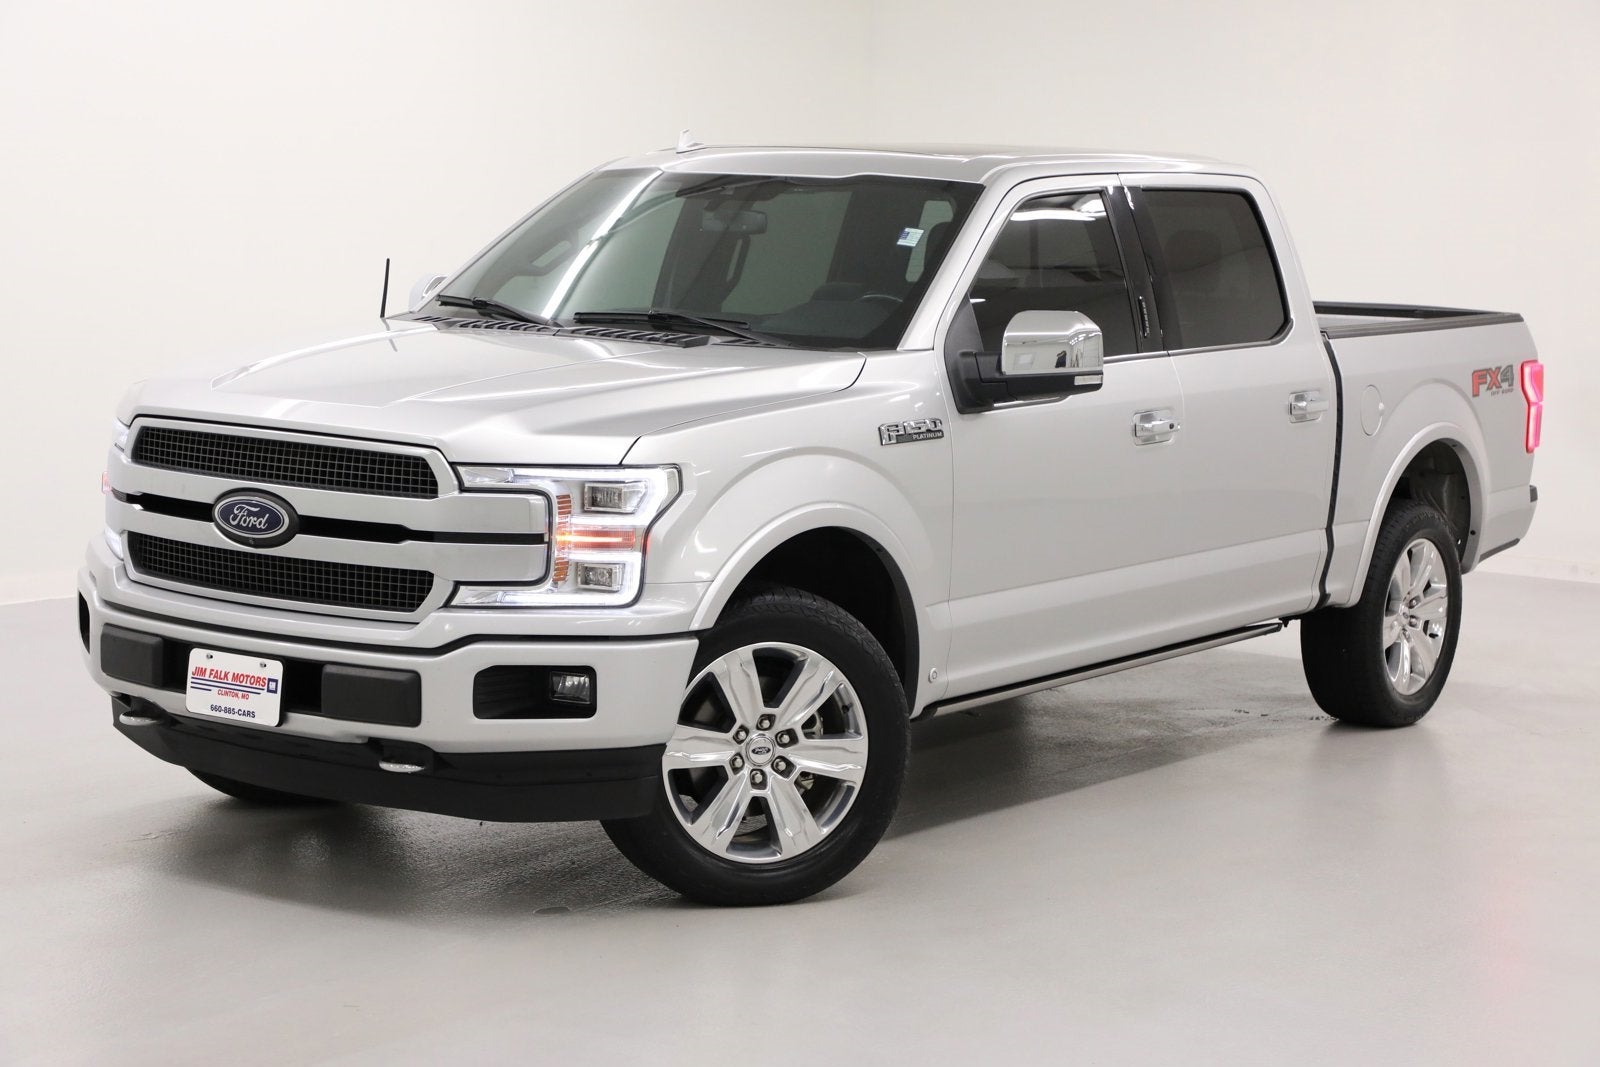 2019 Ford F-150 SuperCrew Platinum FX4 4WD Sunroof Heated Cooled Black Leather Heated Rear Seats 20 Inch Wheels B&amp;O